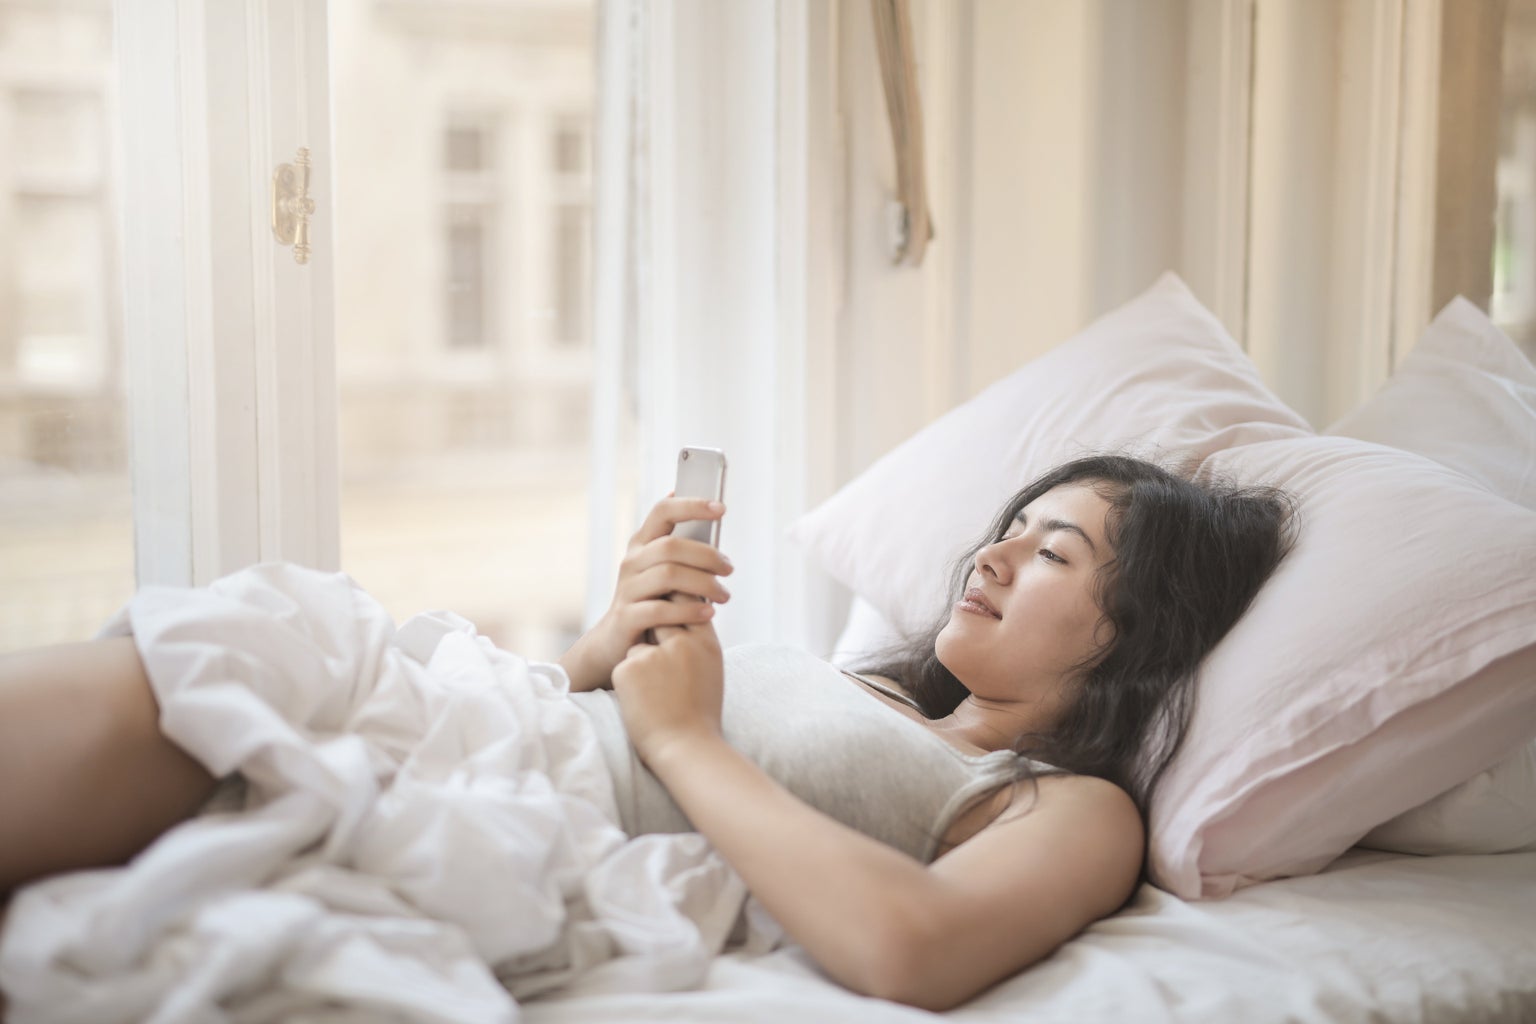 young woman using smartphone in bed 3807633?width=1024&height=1024&fit=cover&auto=webp